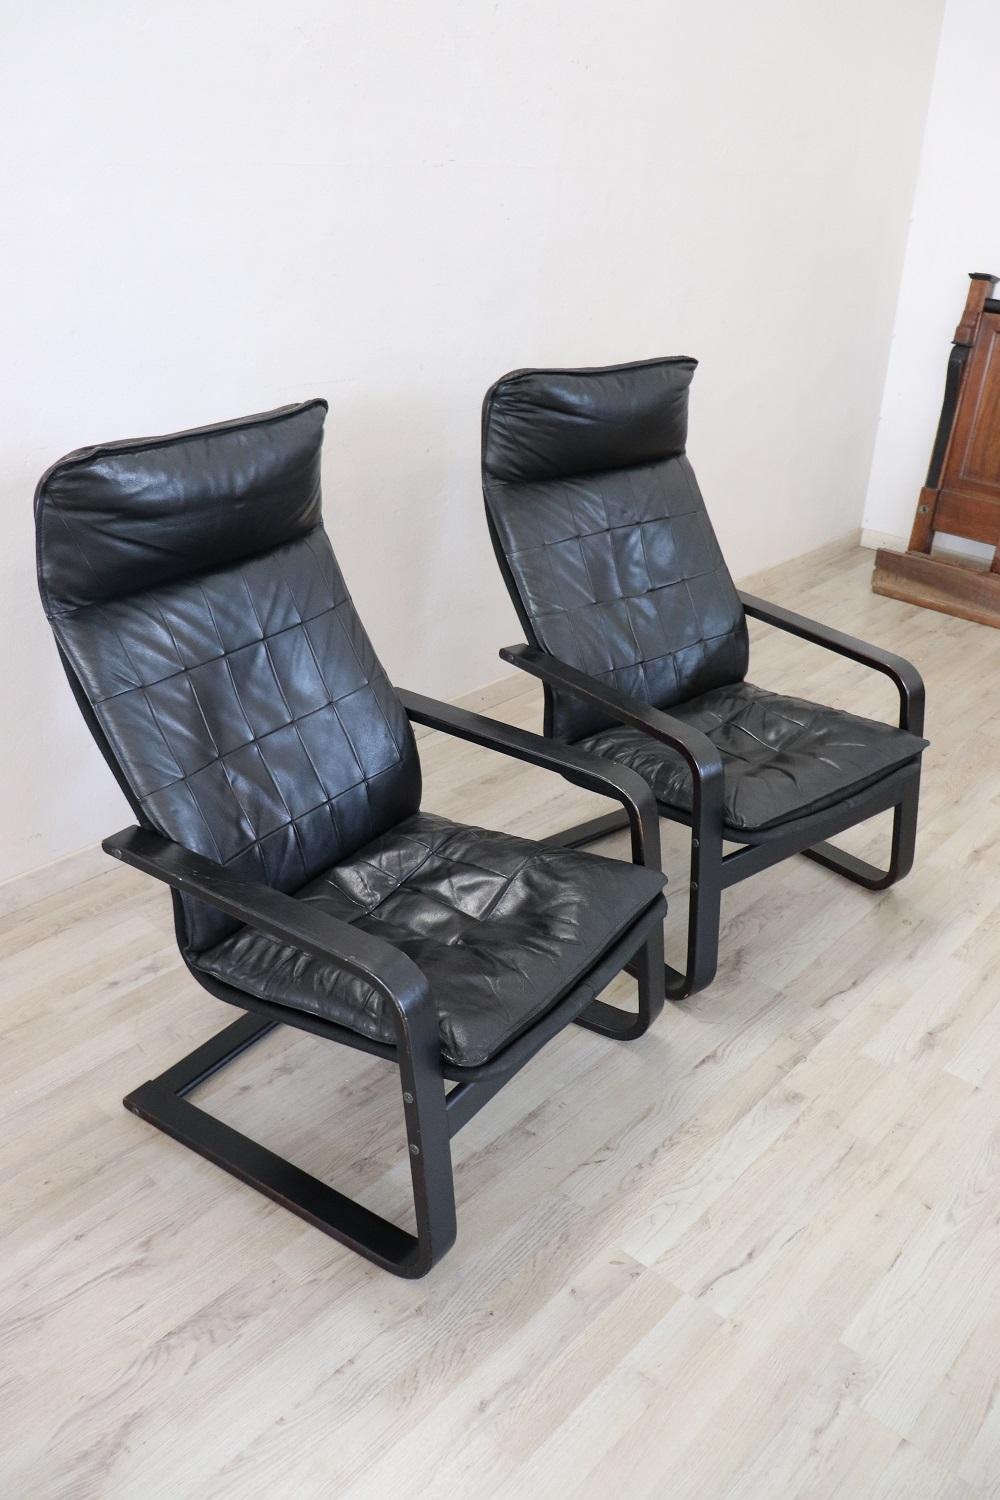 Italian Pair of Lounge Chairs in Black Leather, 1970s For Sale